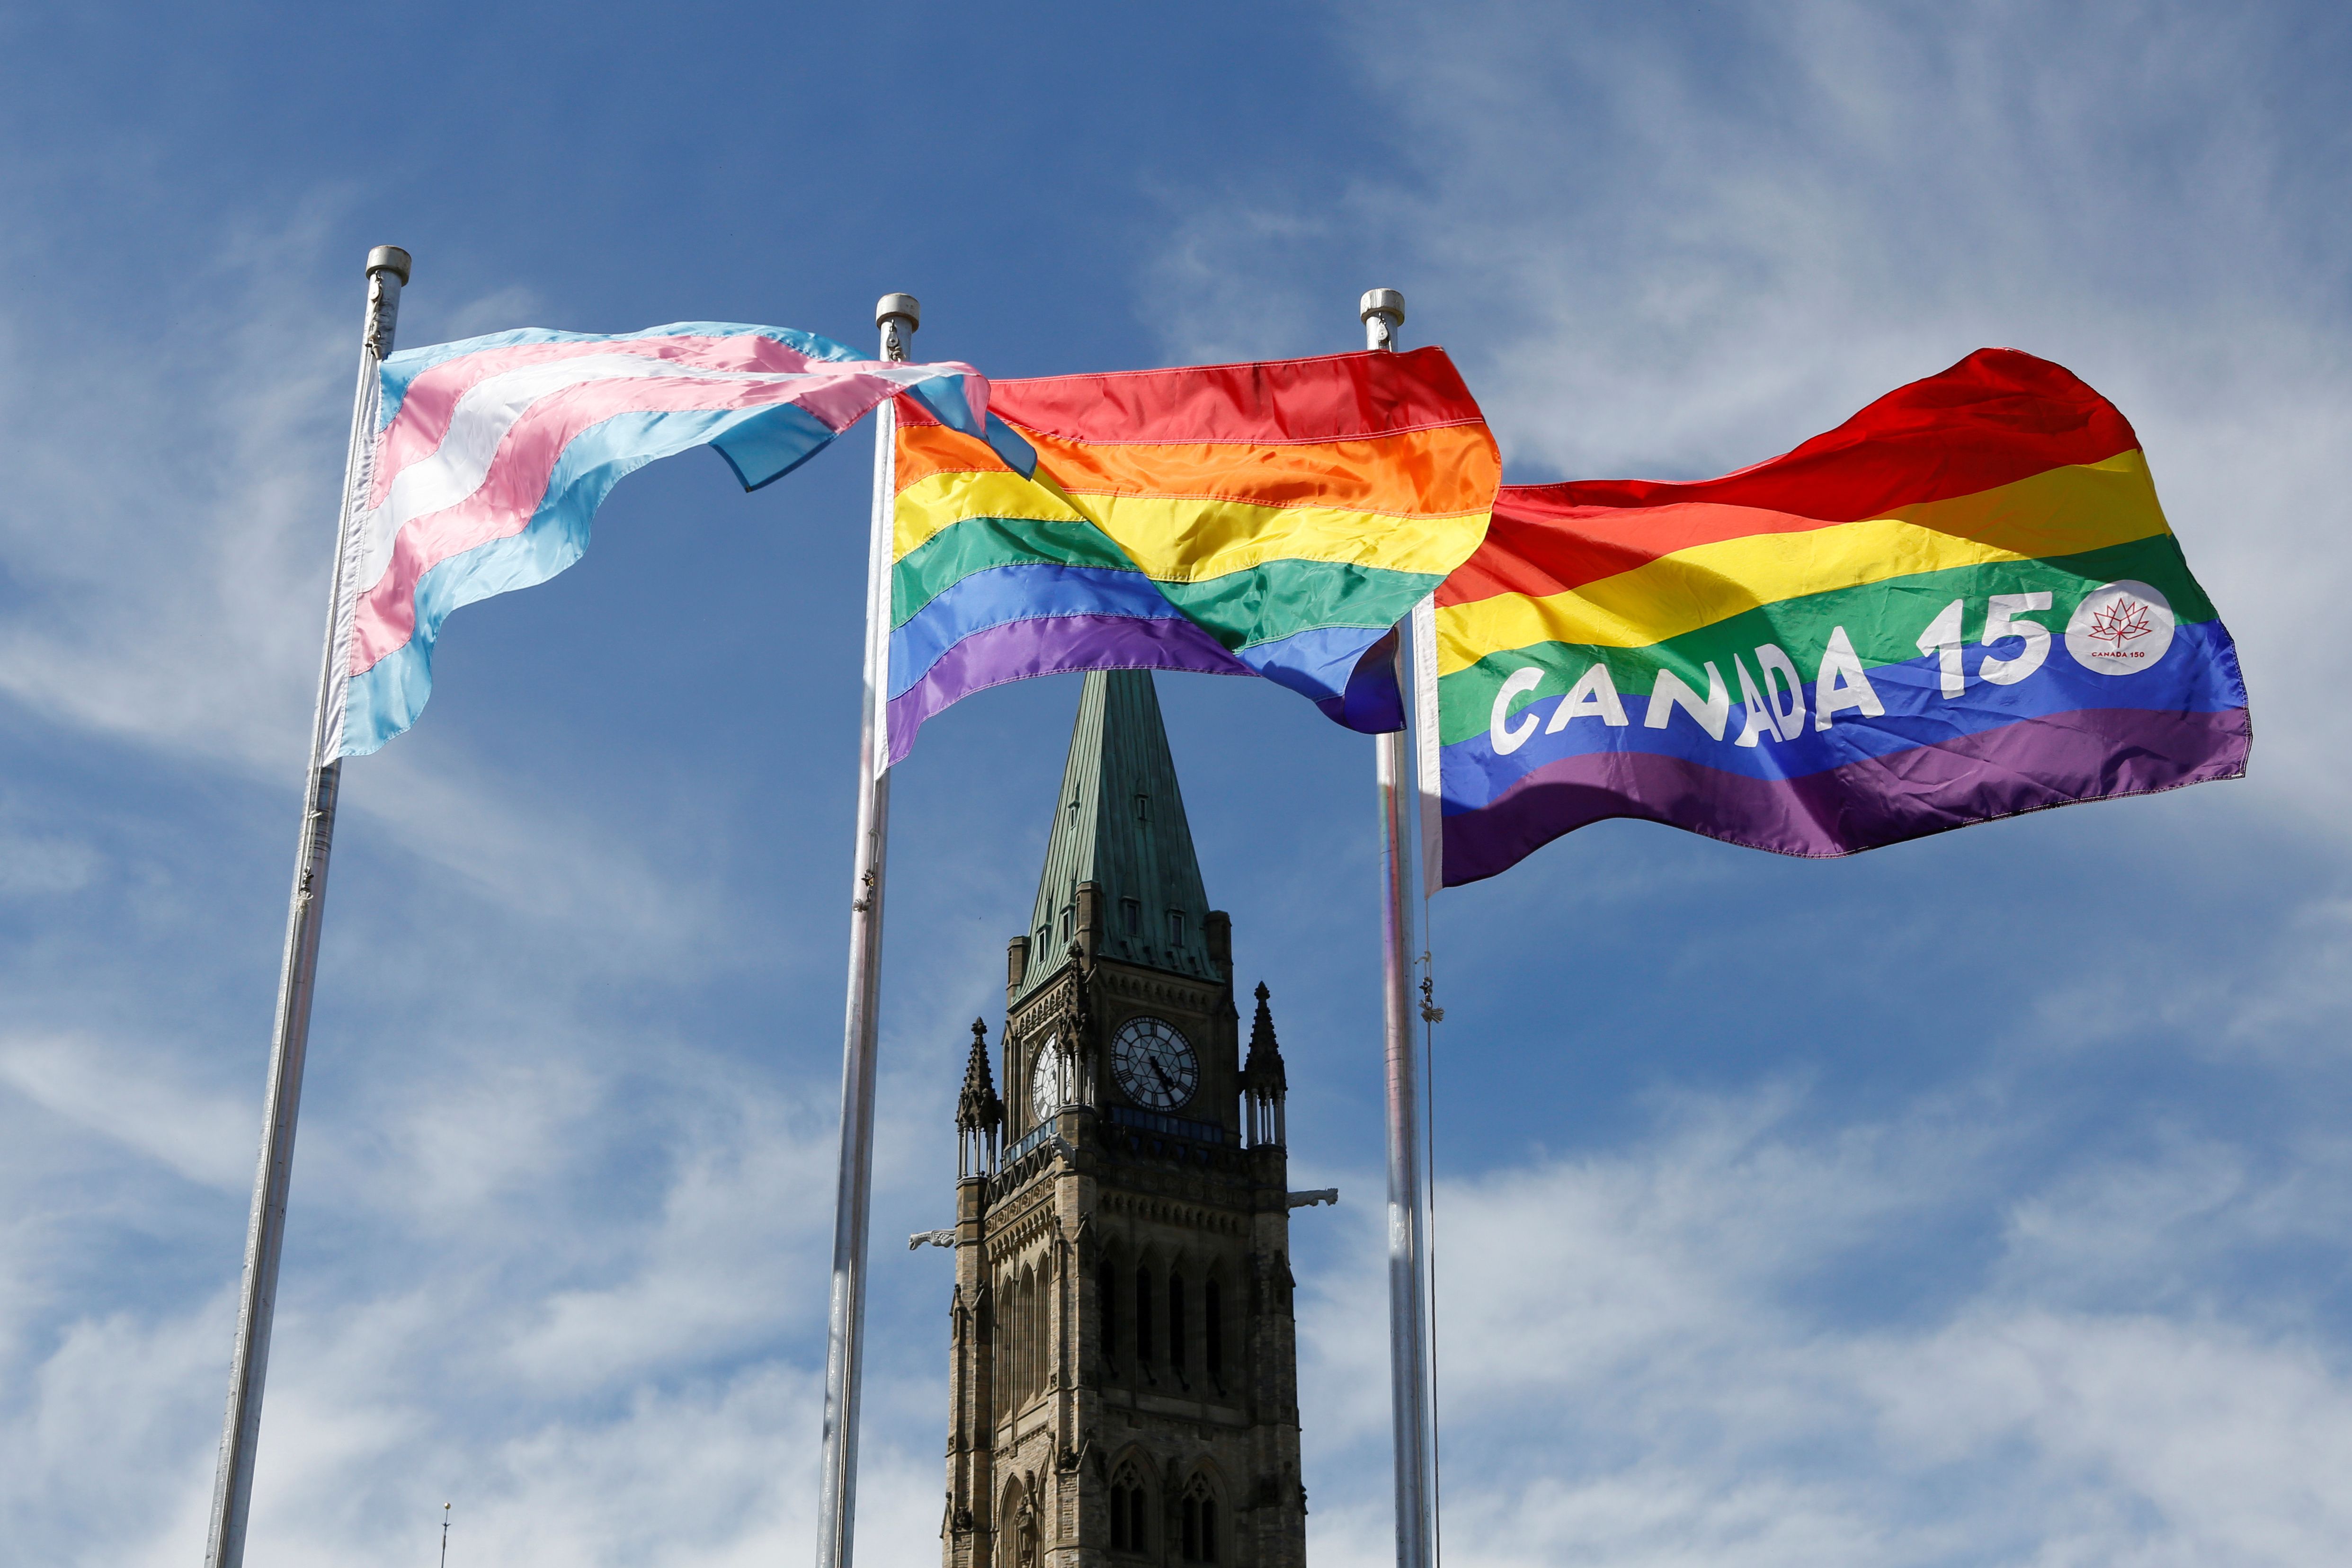 The transgender pride, pride and Canada 150 pride flags fly on Parliament Hill in Ottawa